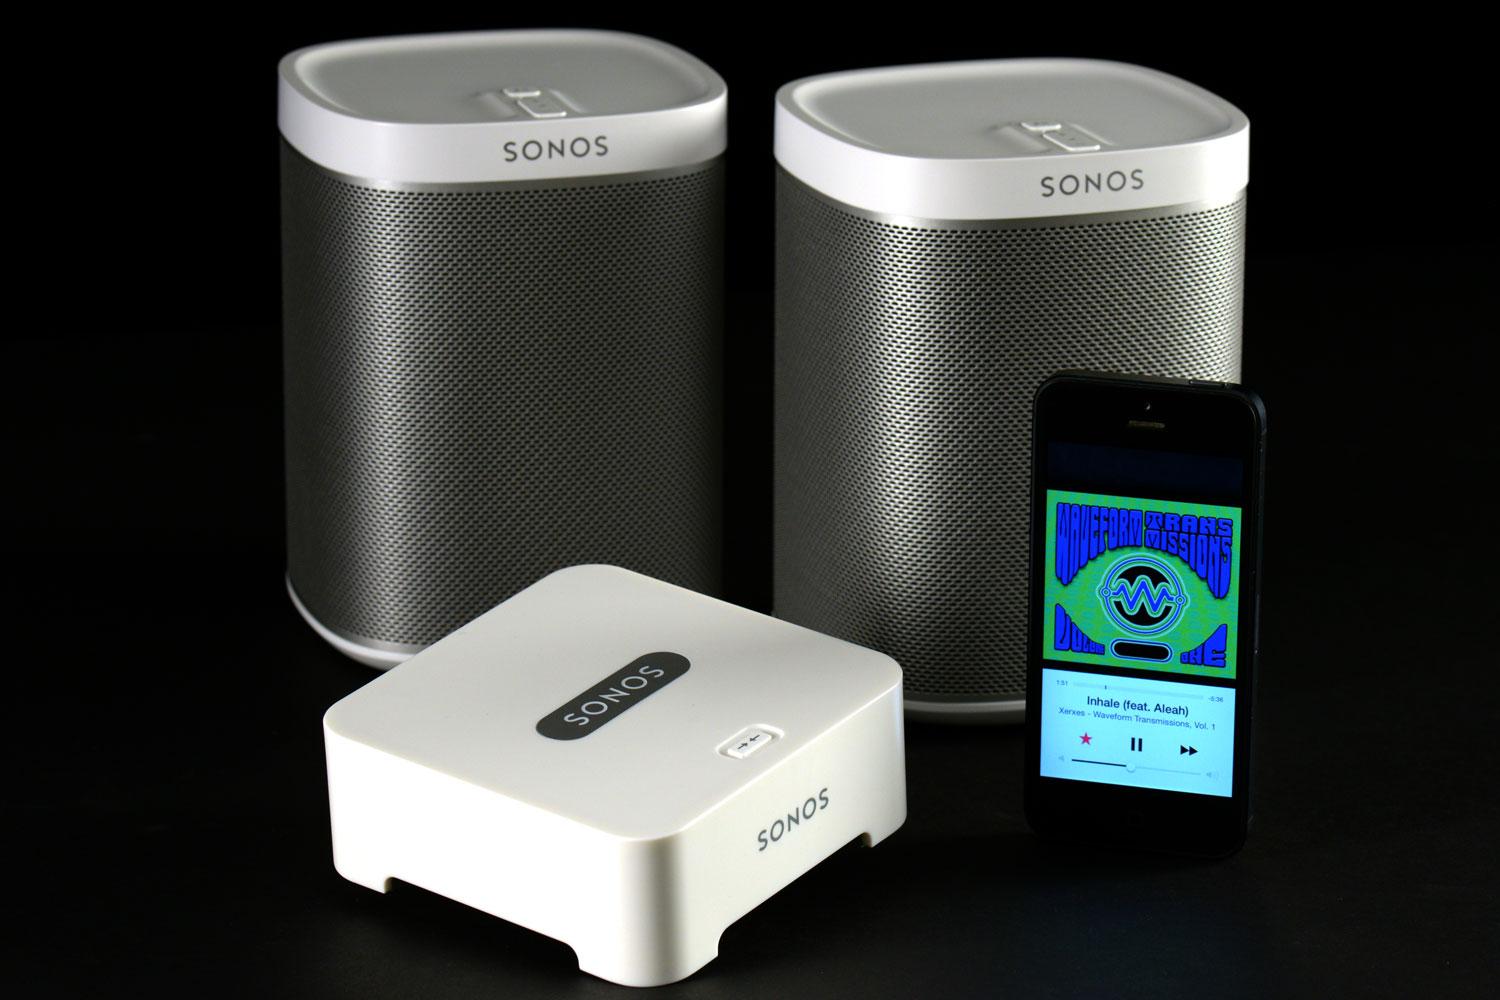 Sonos Speakers Could One Day With All Digital Assistants | Digital Trends